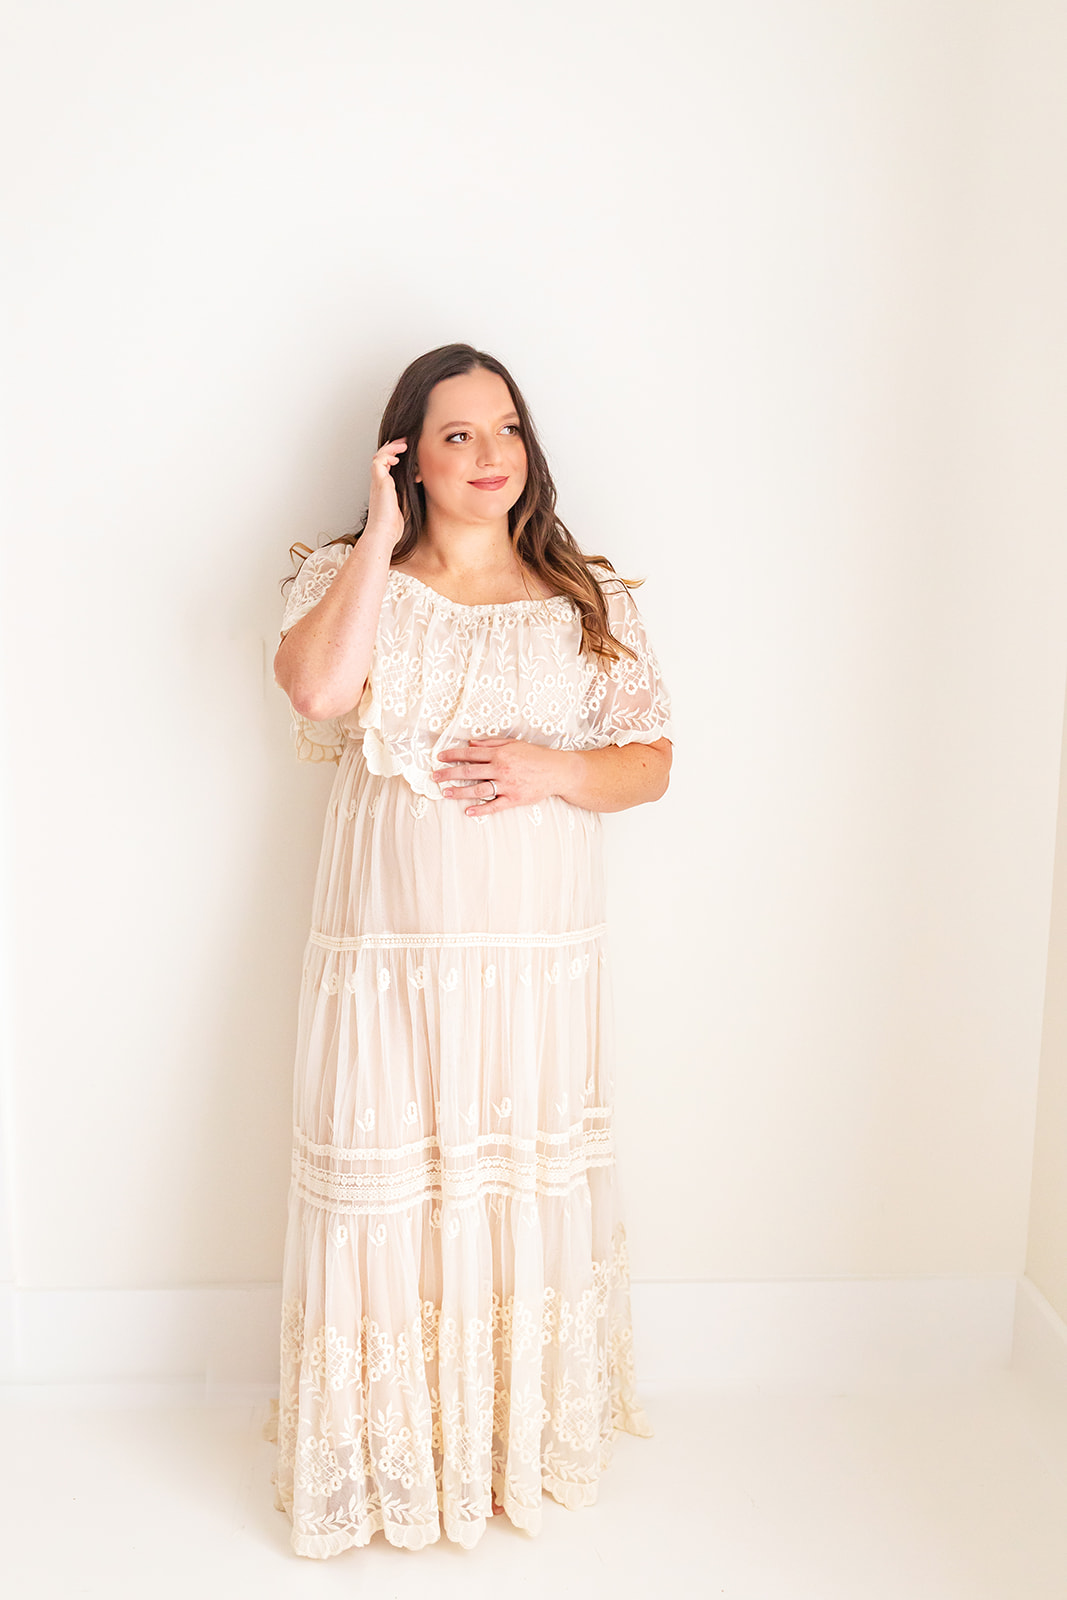 A mother to be stands in a studio while wearing a lace maternity gown